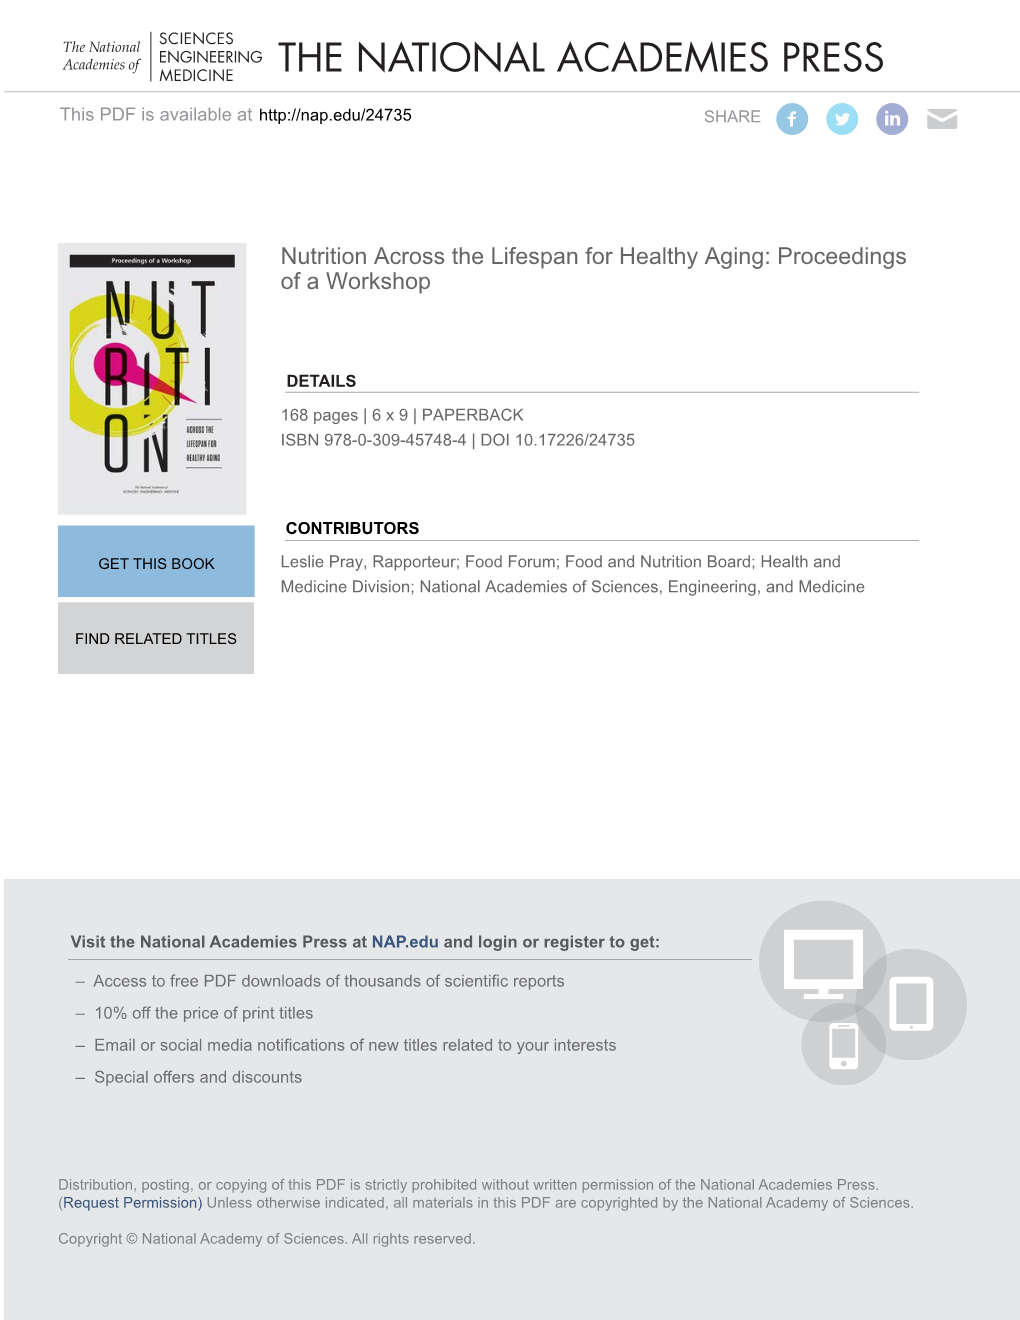 Nutrition Across the Lifespan for Healthy Aging.Pdf